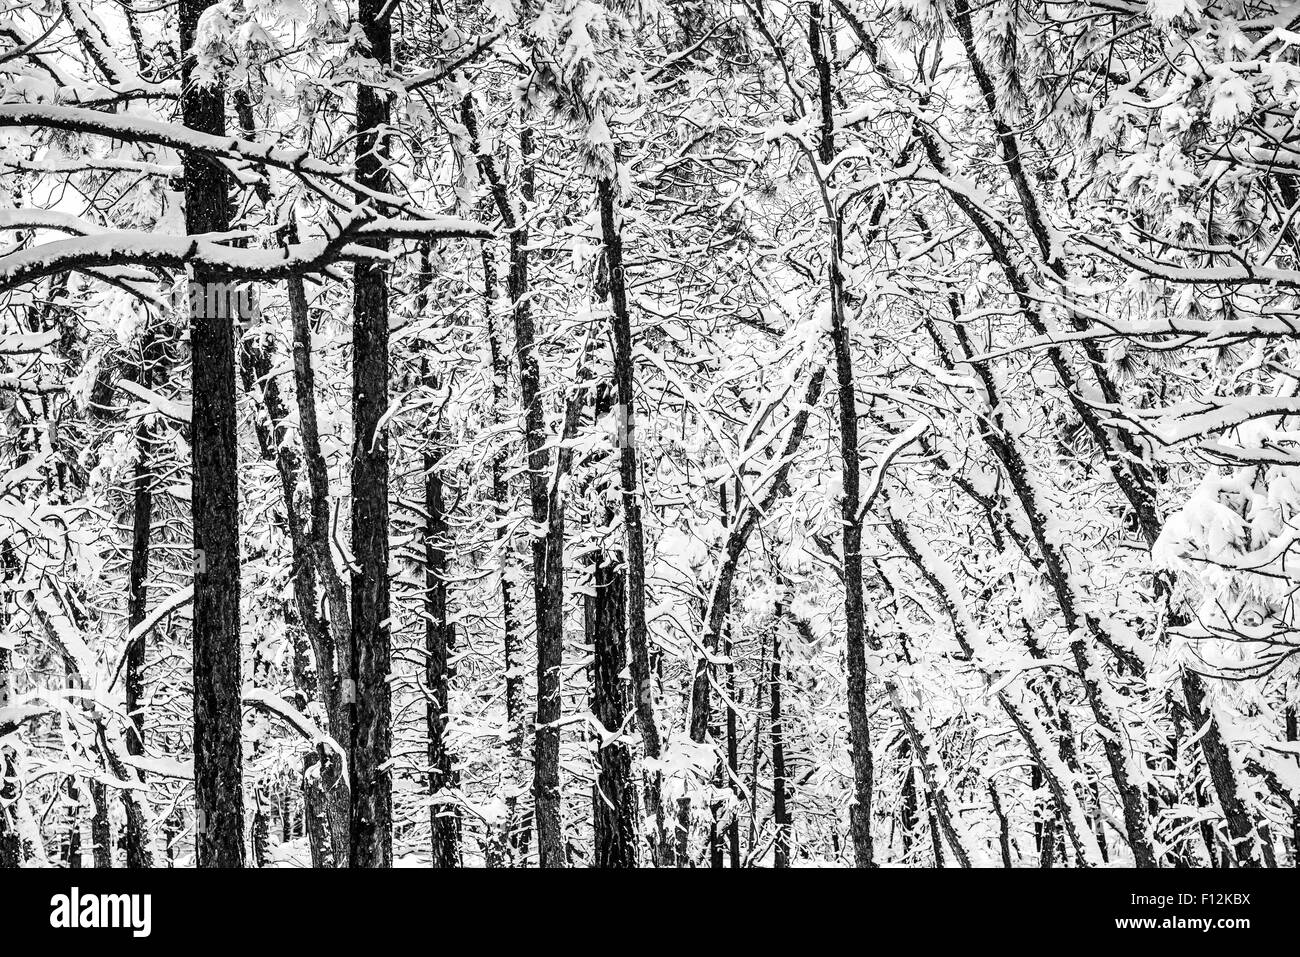 Scenic Winter Forest Pattern. Black and White Winter Forest Theme. Arizona, United States. Stock Photo